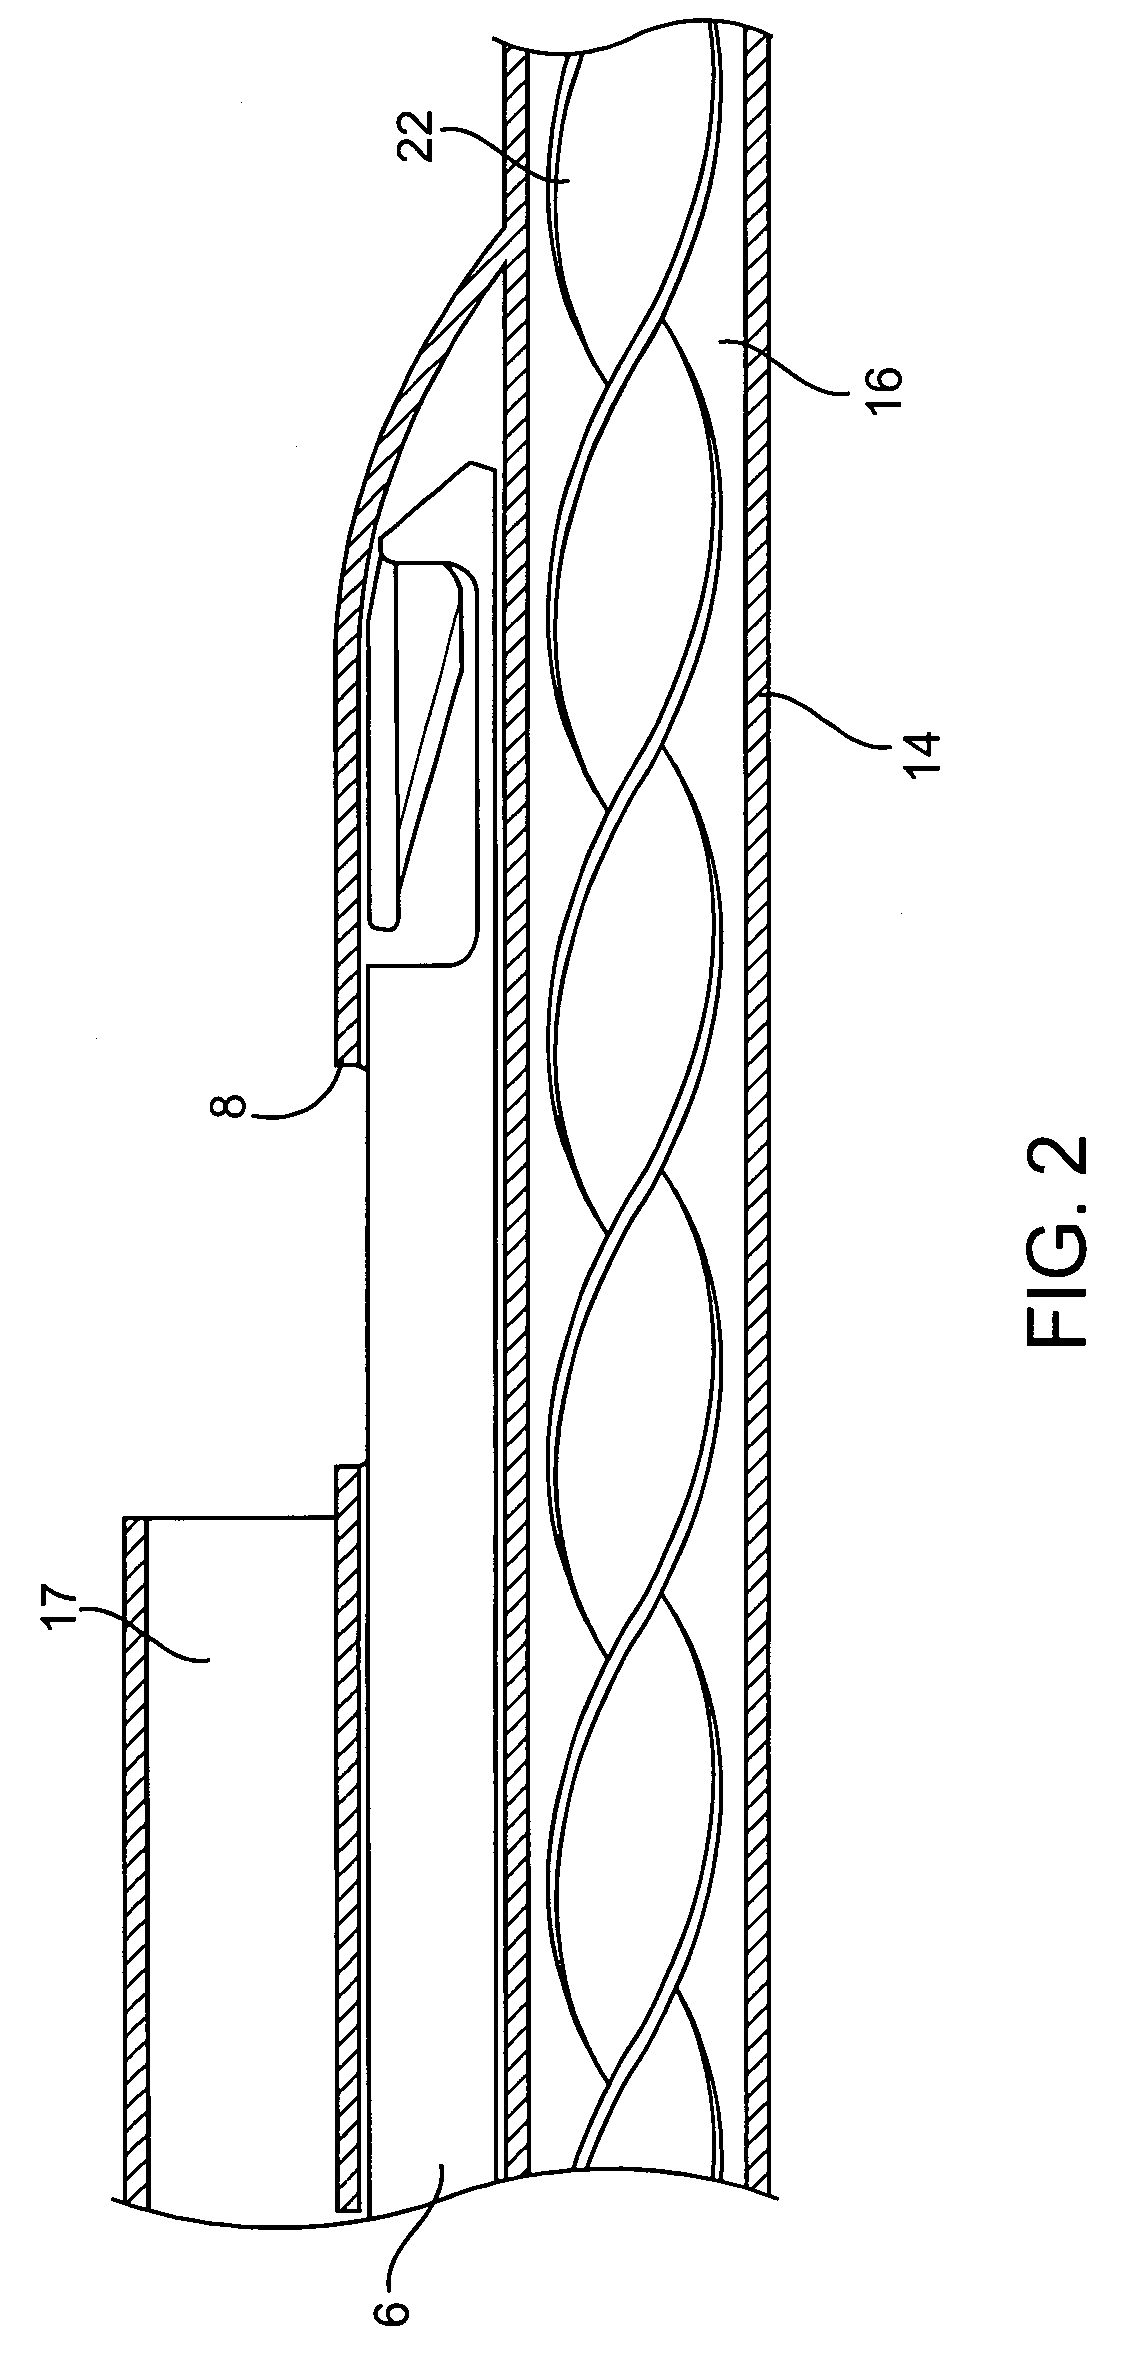 Methods and devices for improving the appearance of tissue